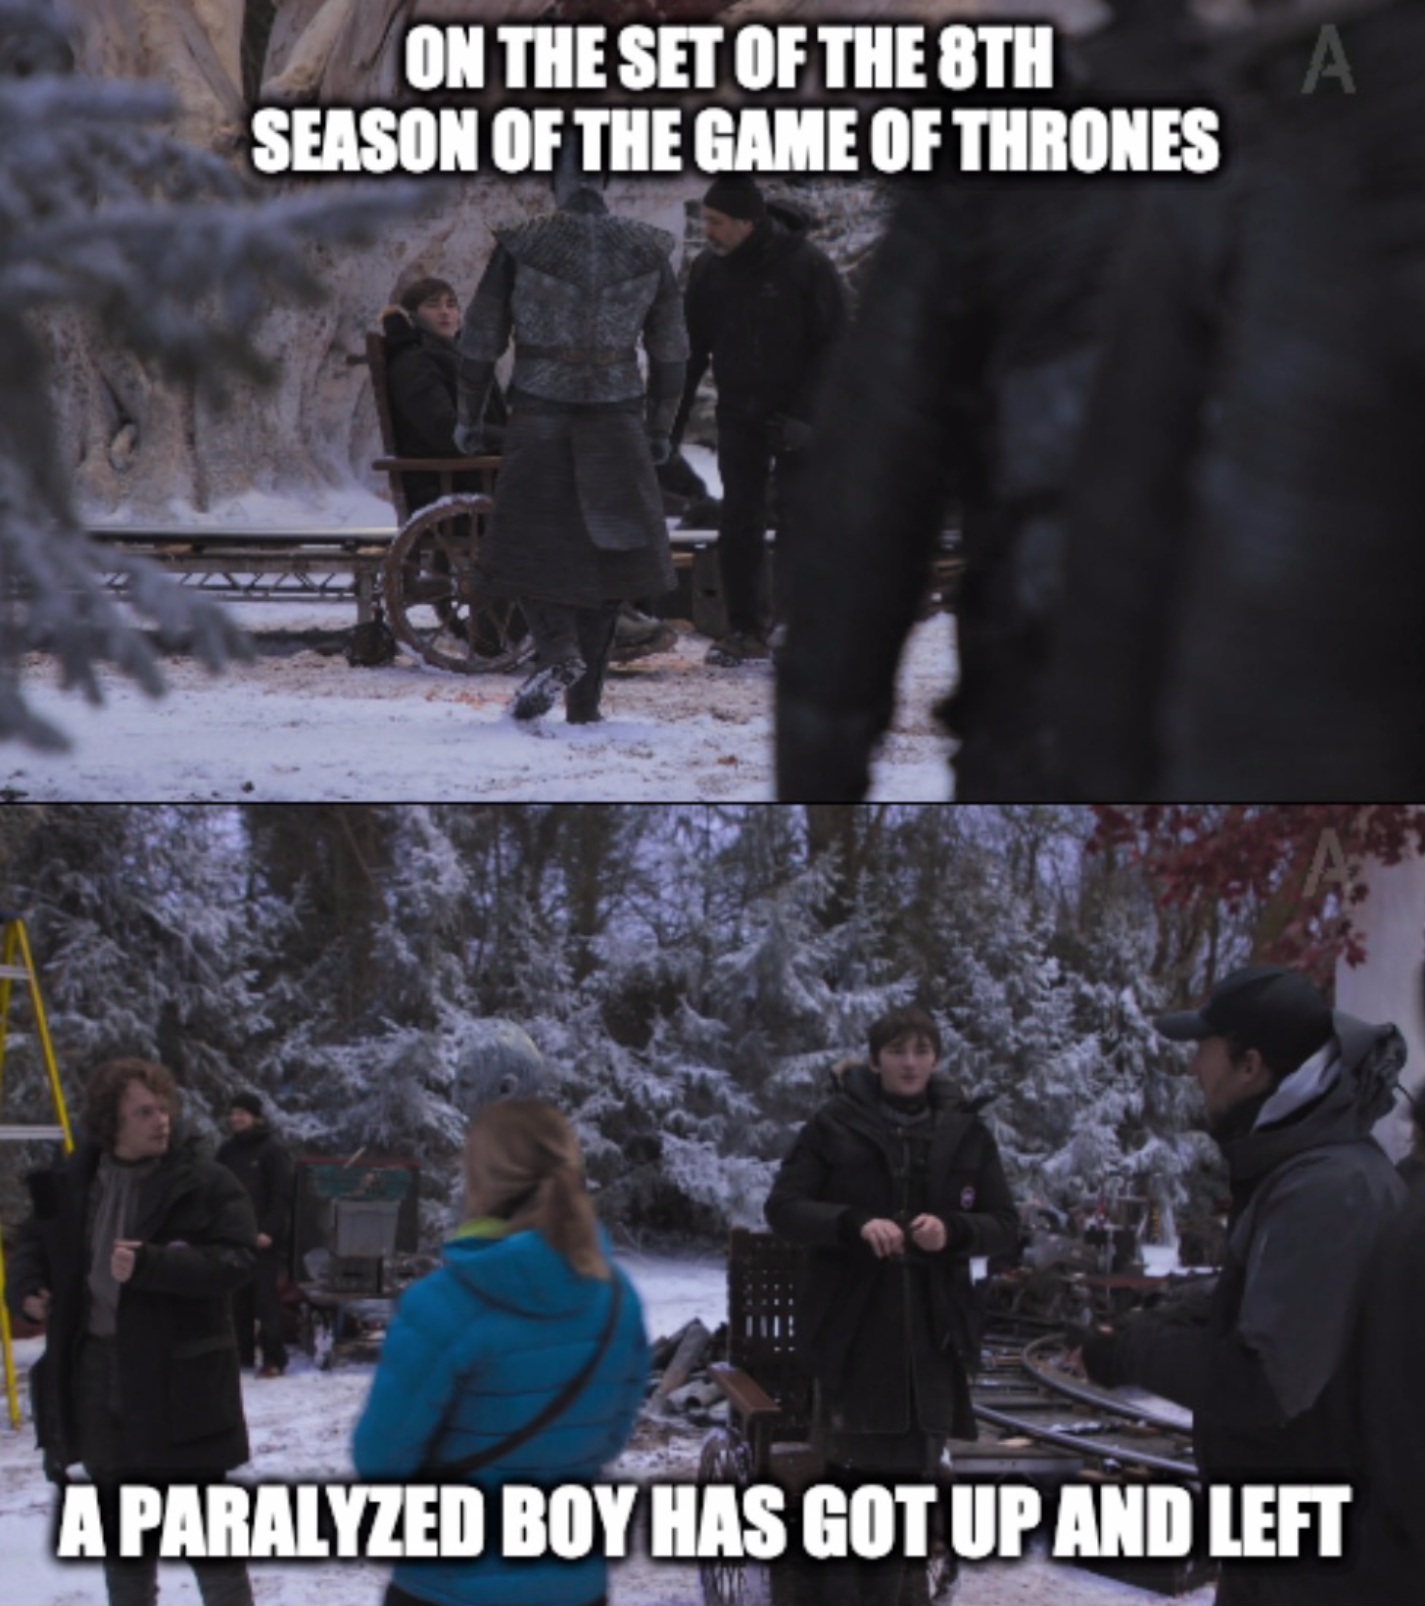 This show is full of wonders. - Game of Thrones, Game of Thrones season 8, Spoiler, Bran Stark, , Photos from filming